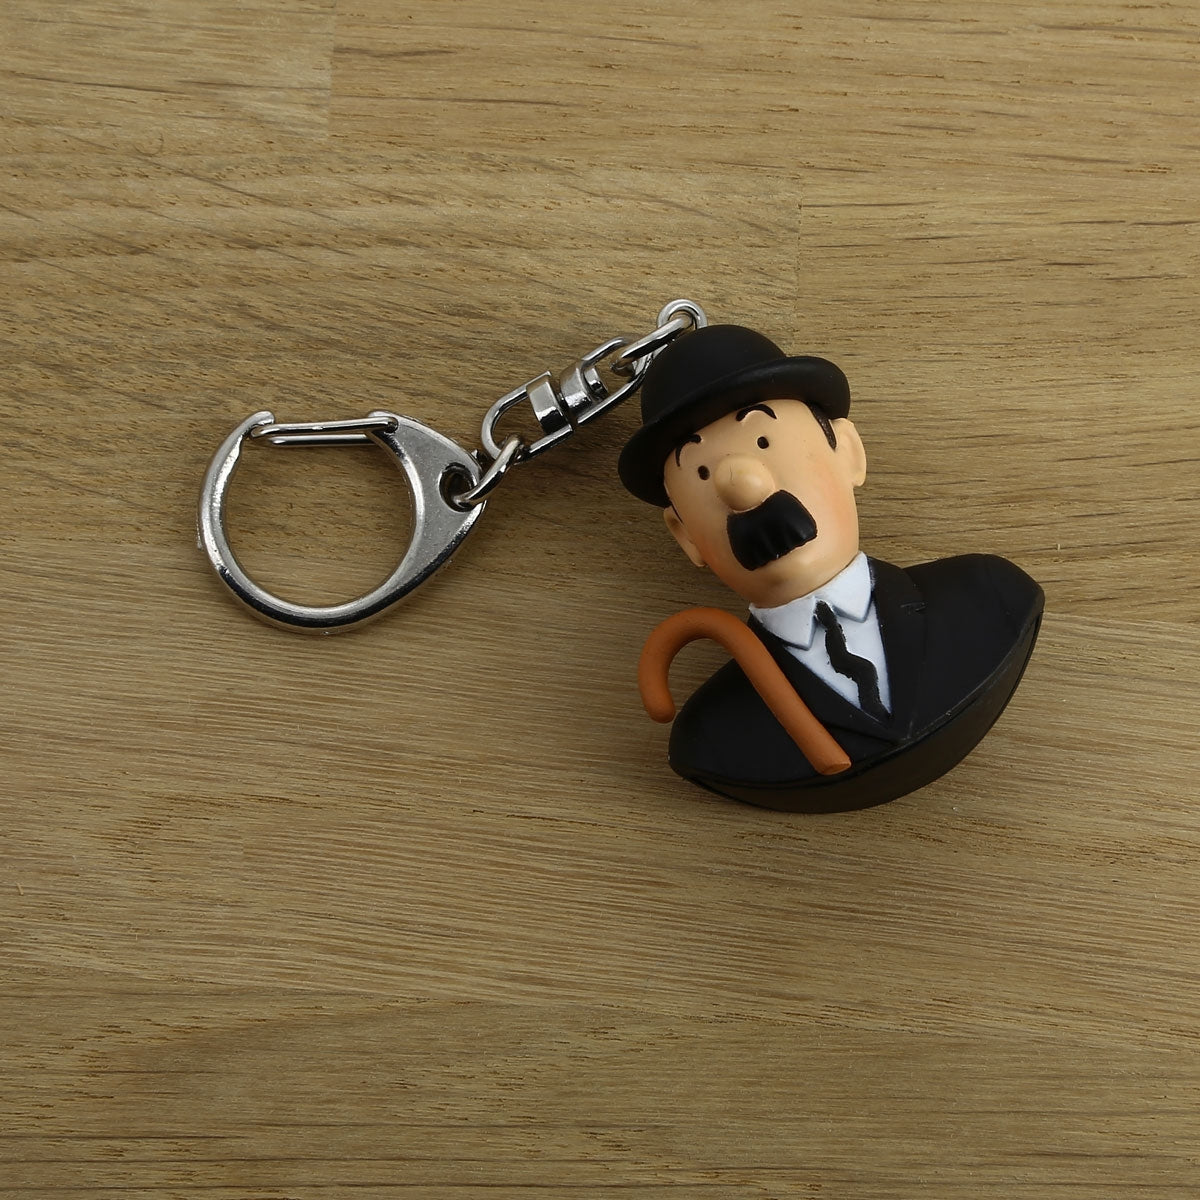 Thomson Bust Keyring. Moulinsart. Compendium Design Store. AfterPay, ZipPay accepted.